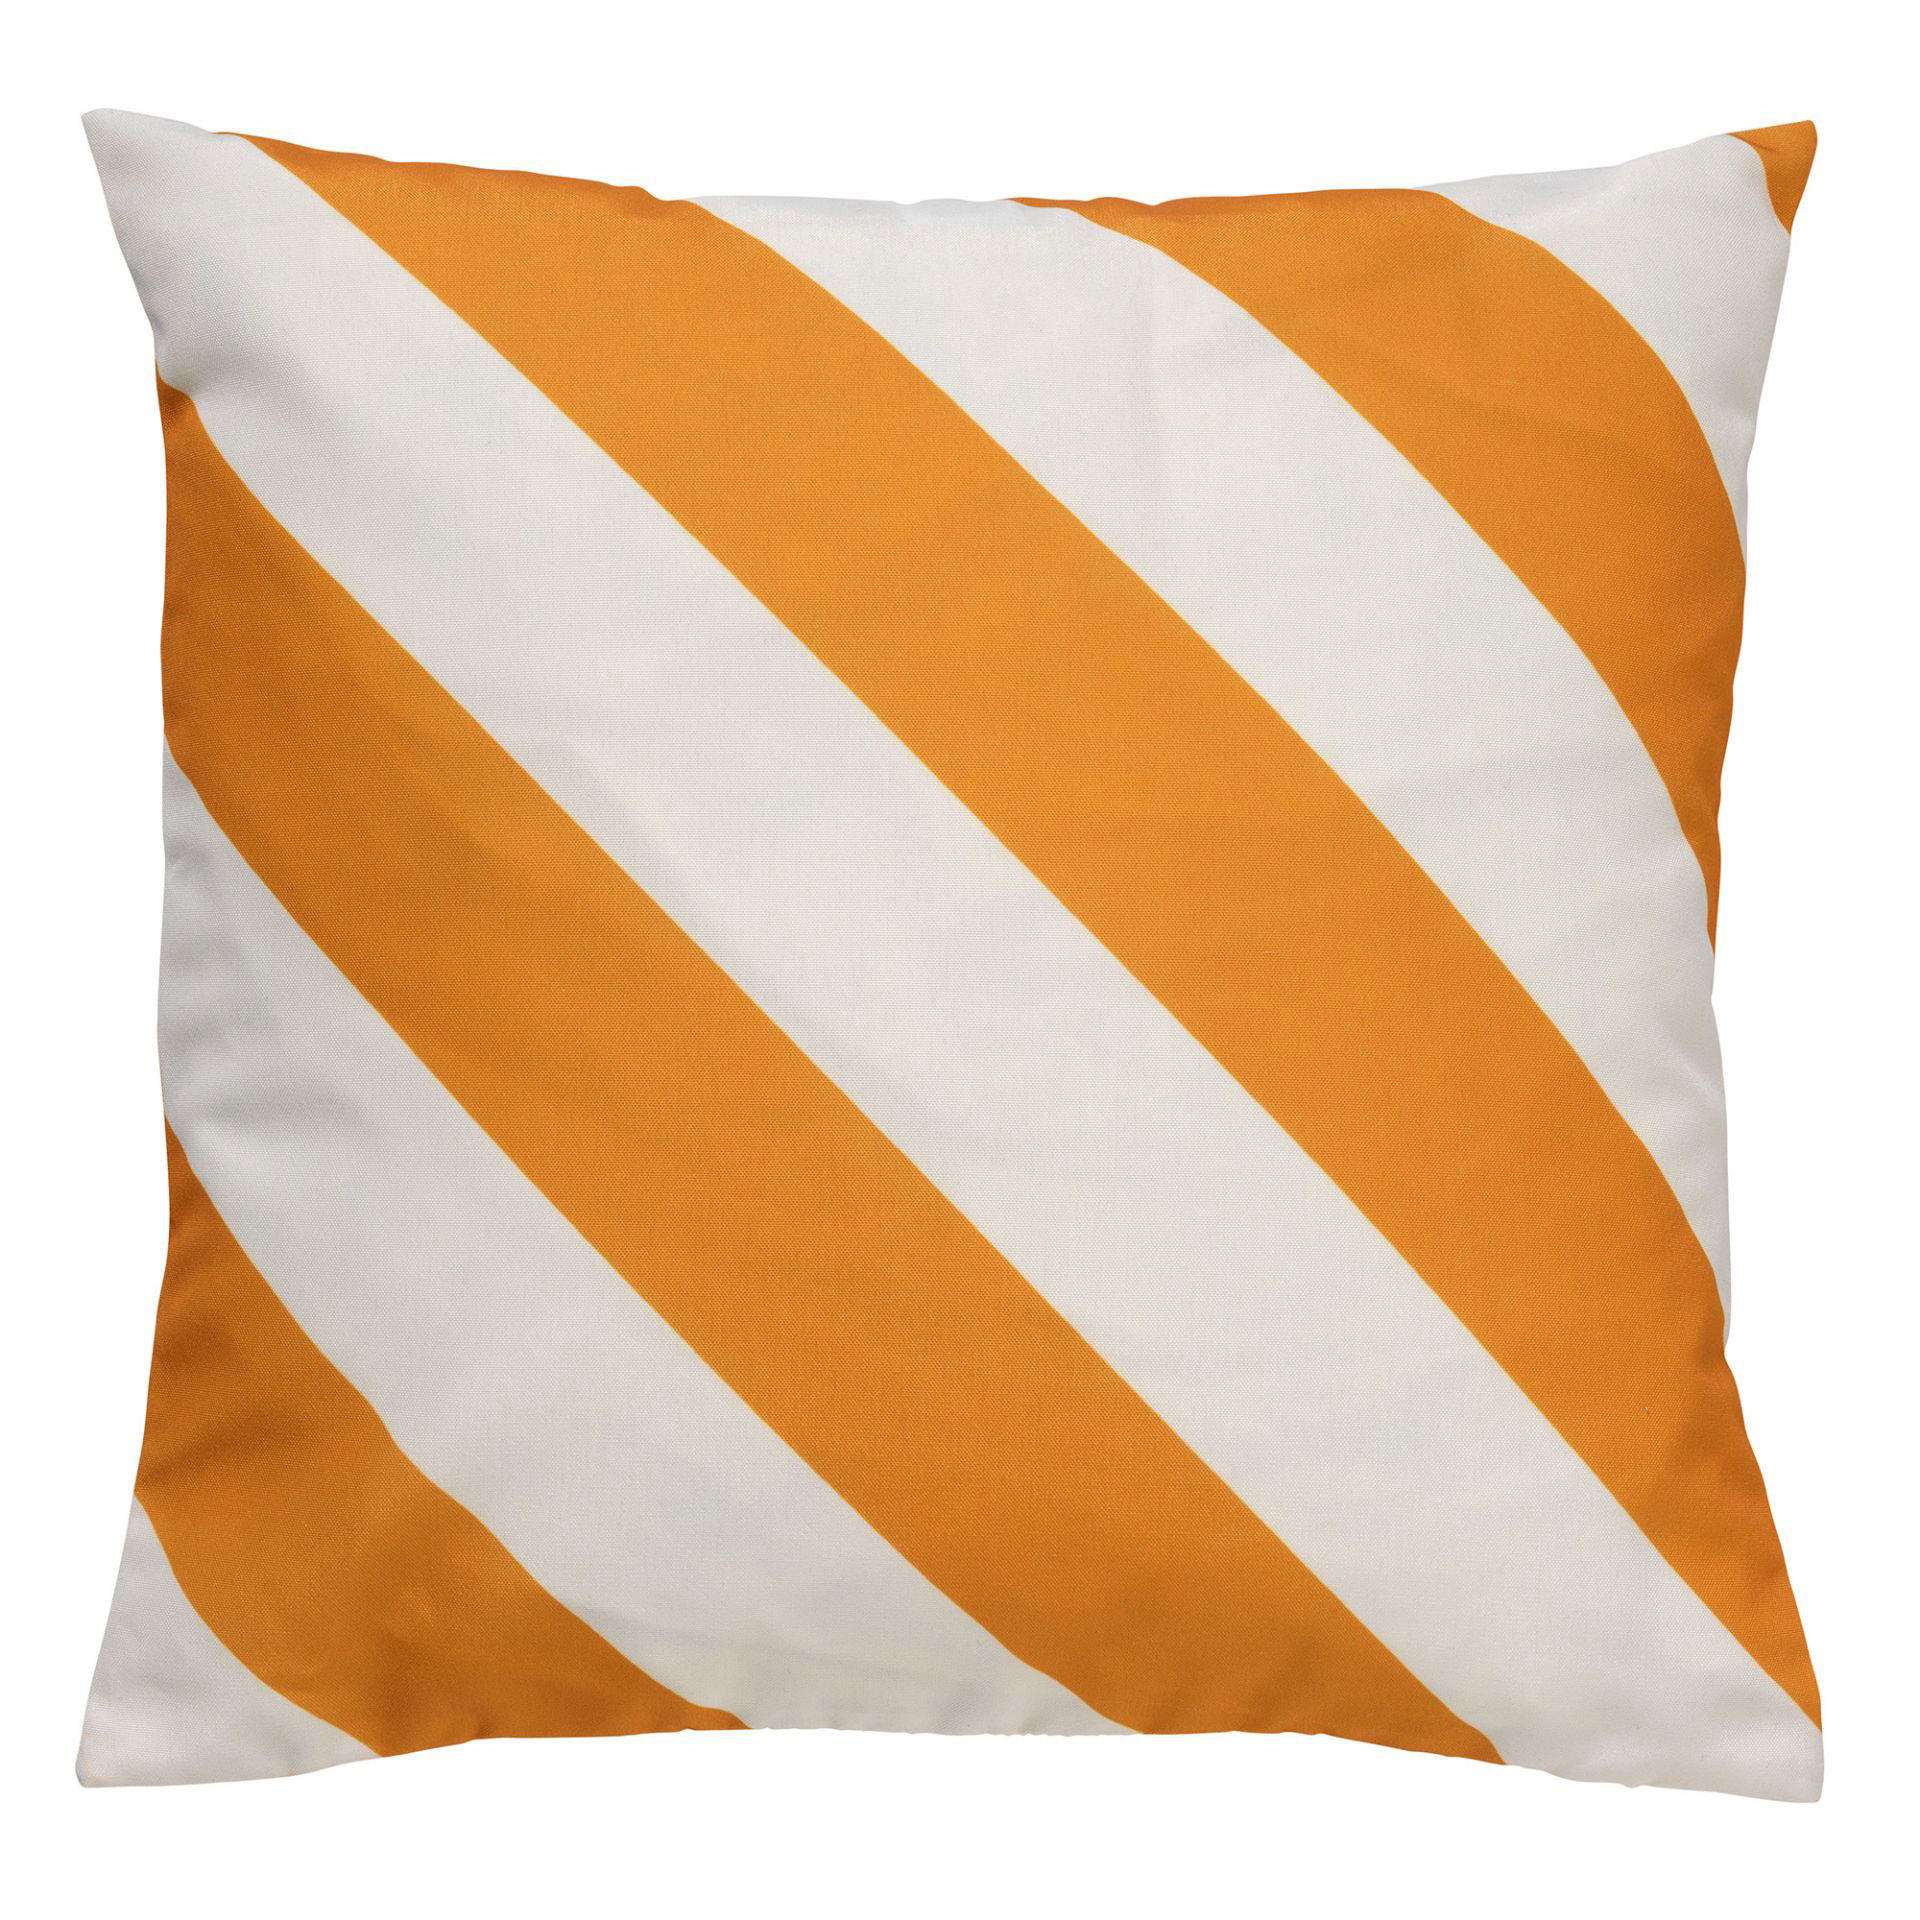 Cushion Sanzeno 45x45 cm Golden Glow - water-repellent and UV-resistant -striped - white and yellow